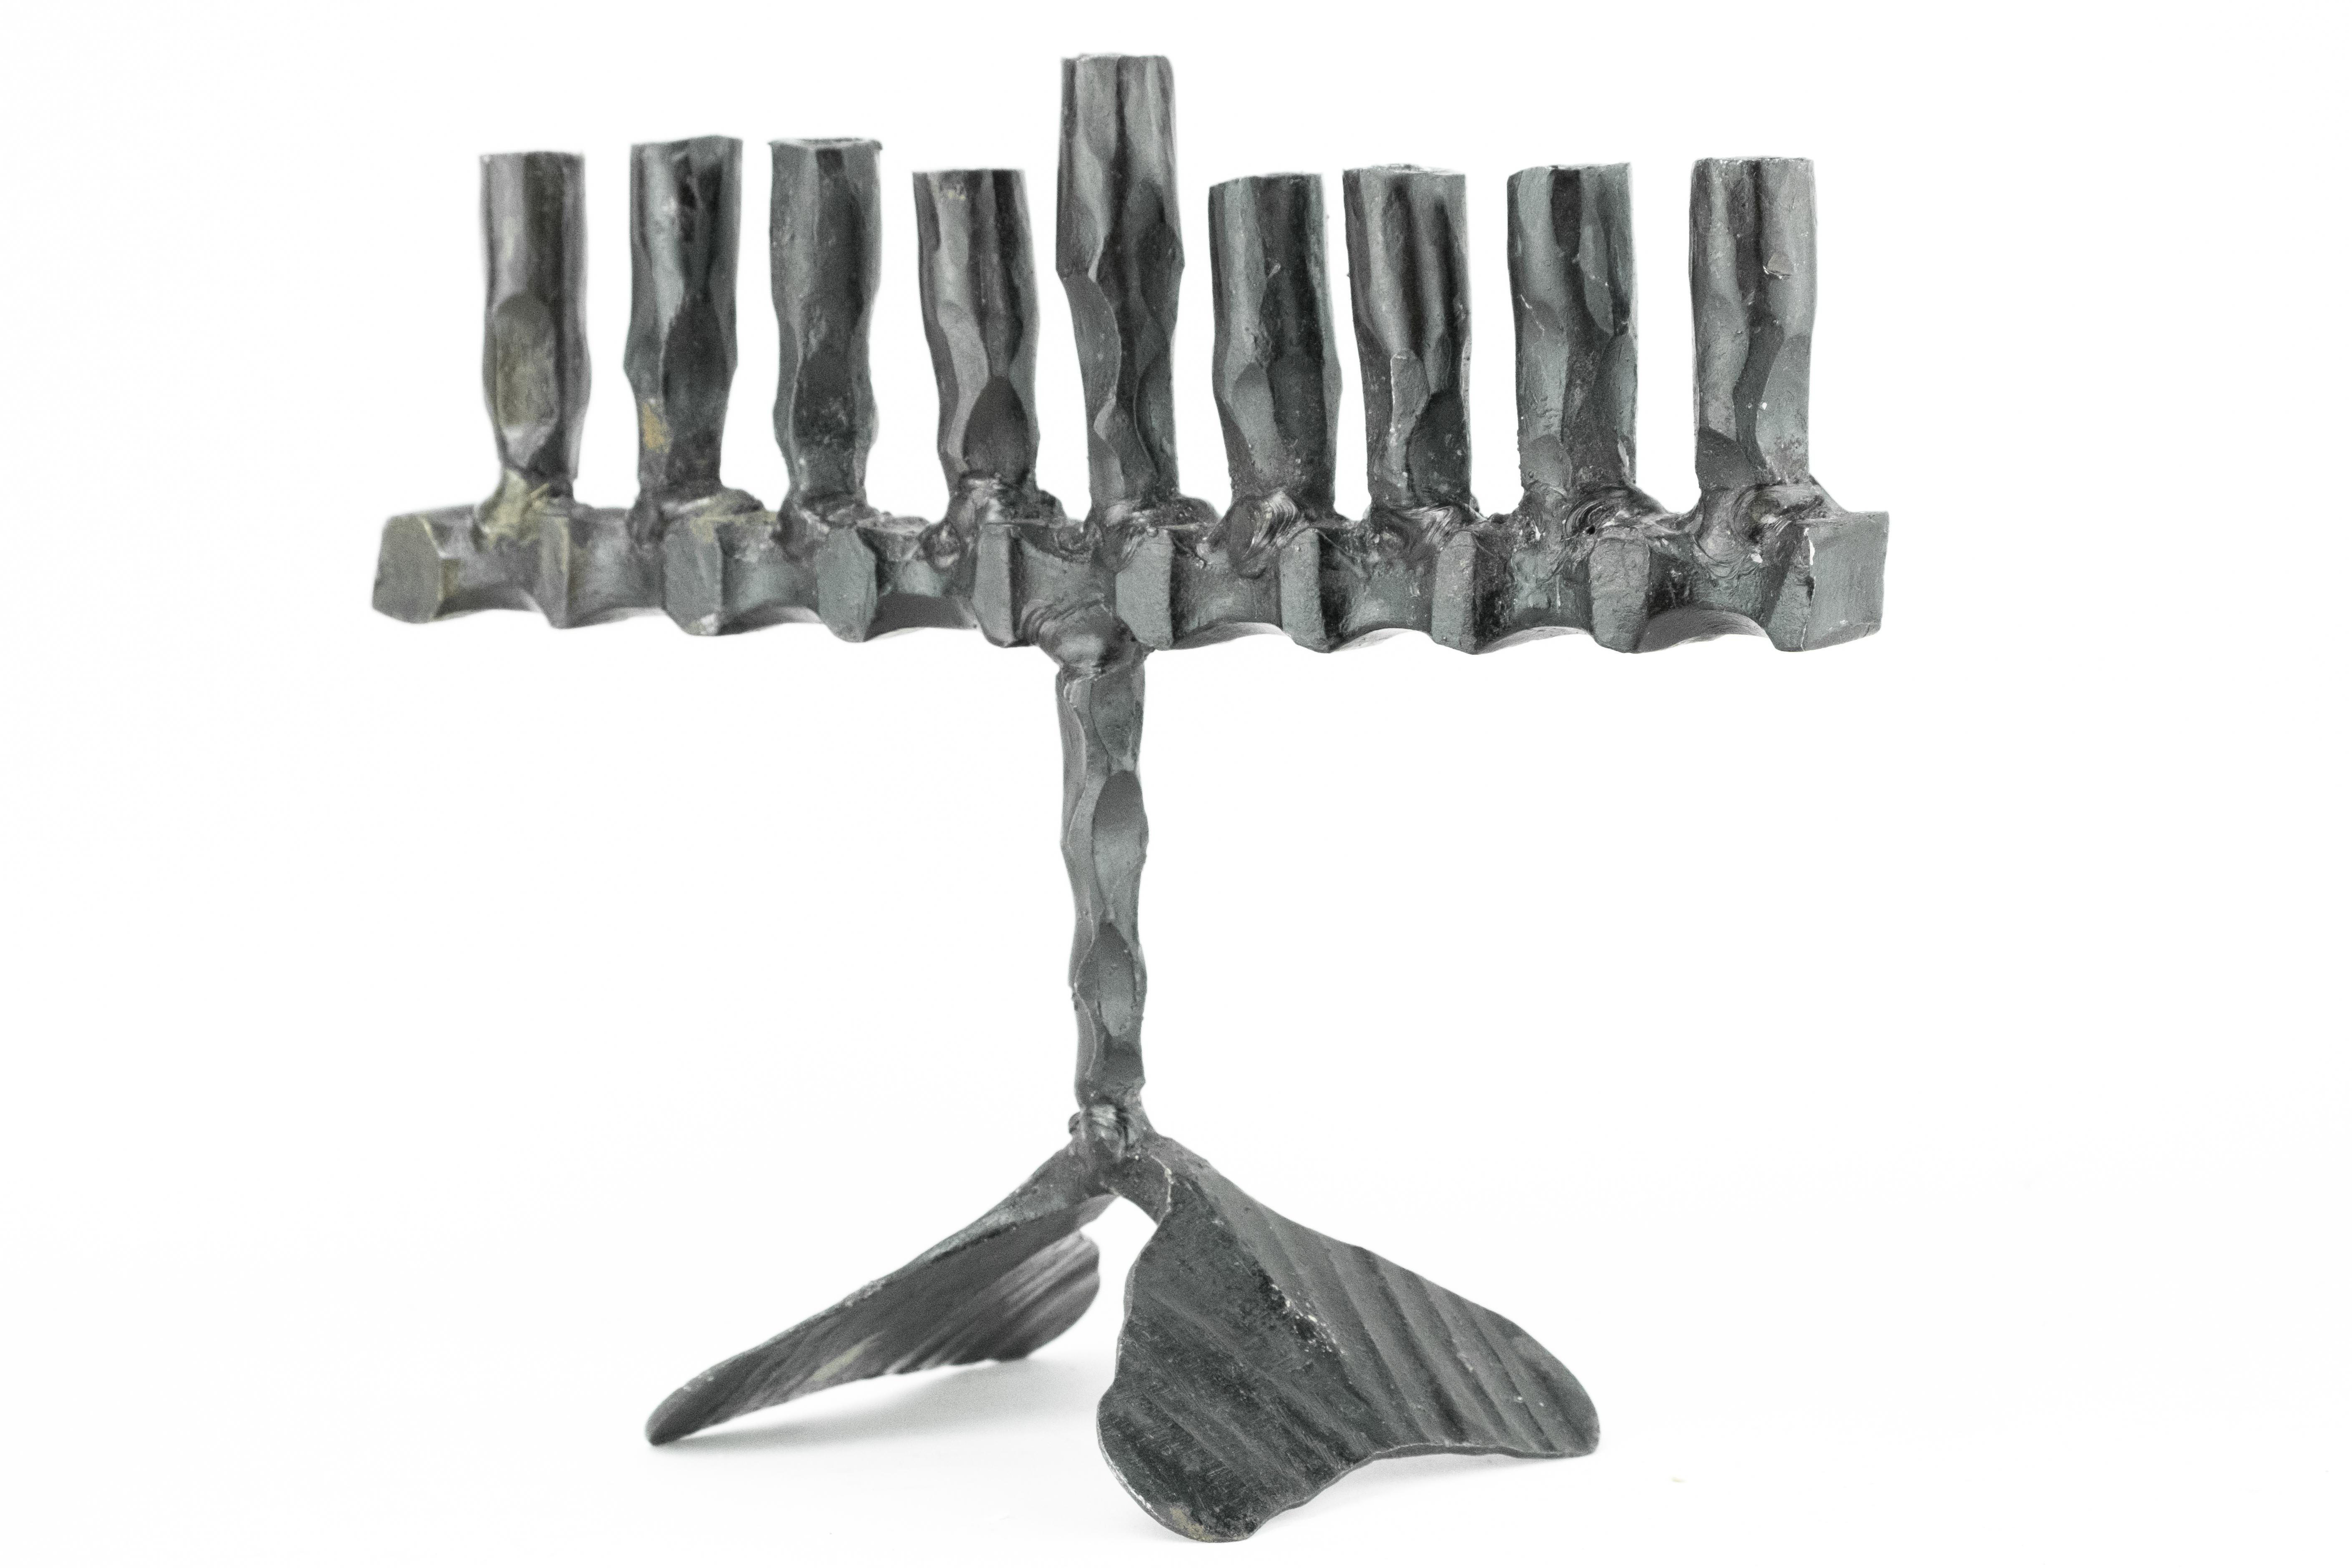 Hand forged, iron Hanukkah lamp Menorah in the style known as “Brutalism”, David Palombo, Jerusalem, Israel, circa 1955.

David Palombo (1920-1966), was a sculptor and painter. He was born in Turkey and immigrated to Israel with his parents in 1923.